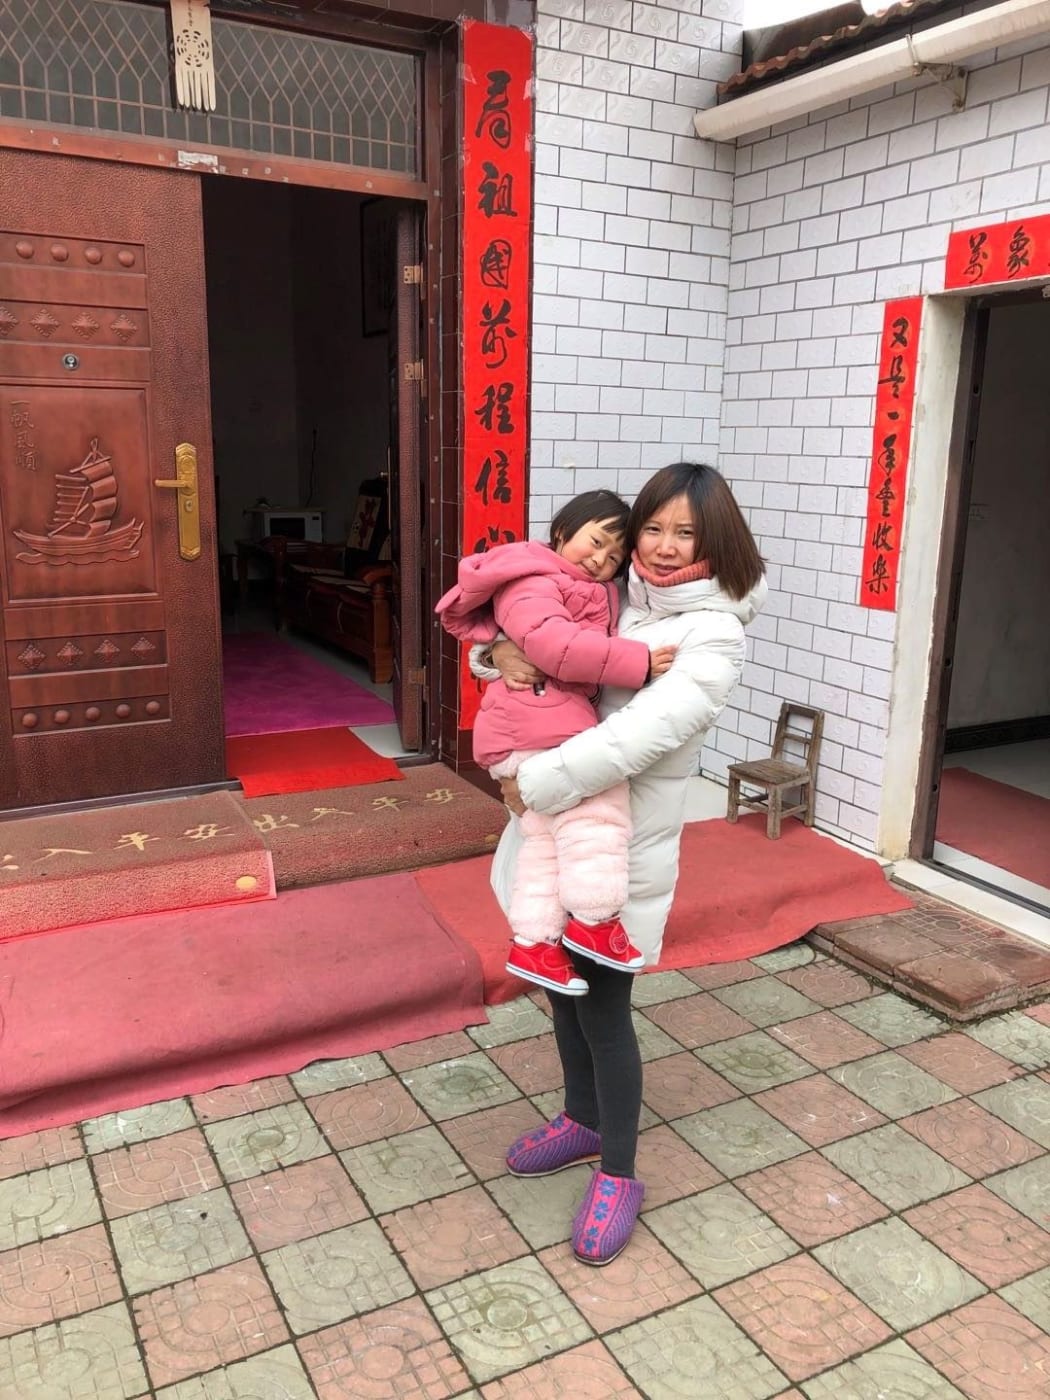 New Zealand resident Lily GAO and her two and half year old daughter Elysse are one of those who stuck in Wuhan.